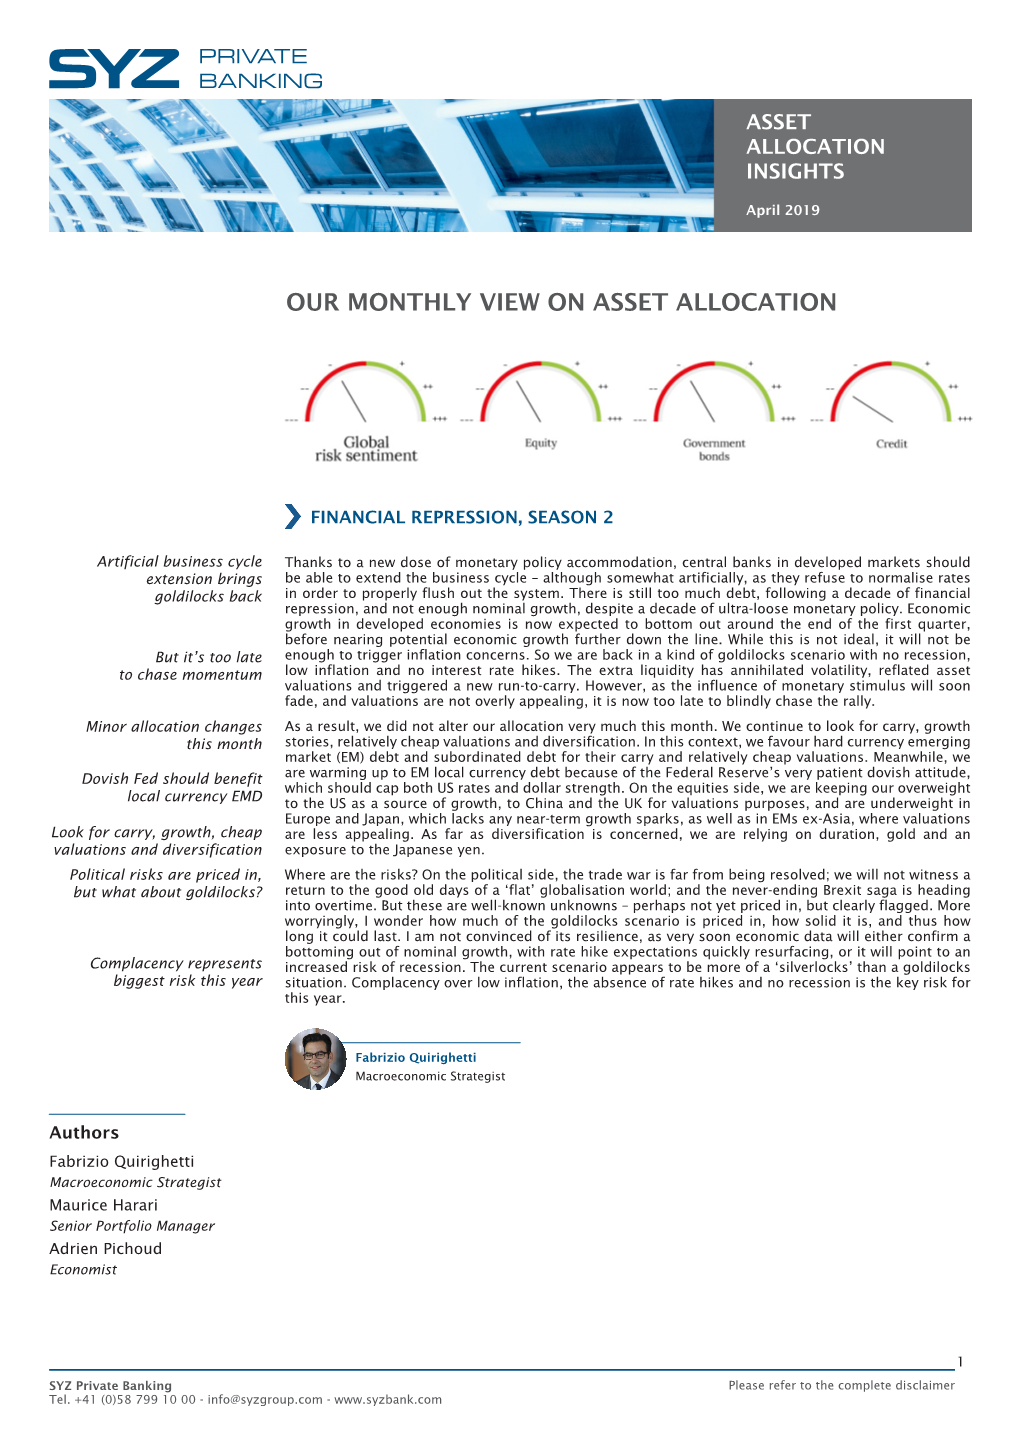 Our Monthly View on Asset Allocation